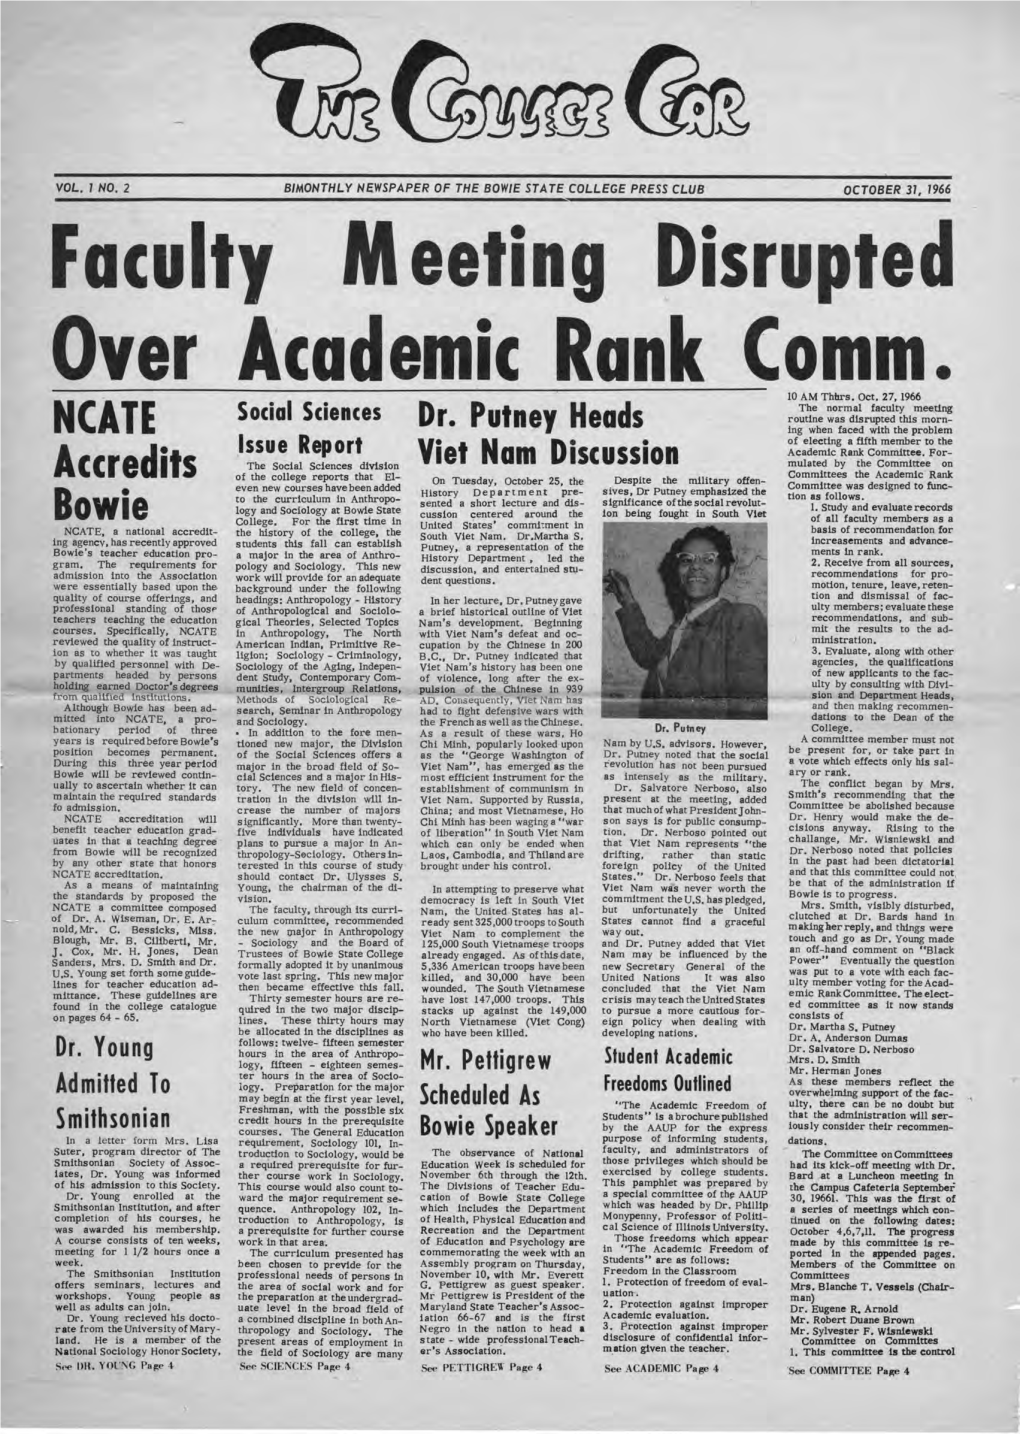 Faculty Meeting Disrupted Over Academic Rank Comm. 10 AM Thbrs, Oct, 27, 1966 the Normal Faculty Meeting Social Sciences Routine Was Disrupted This Morn­ NCATE Dr